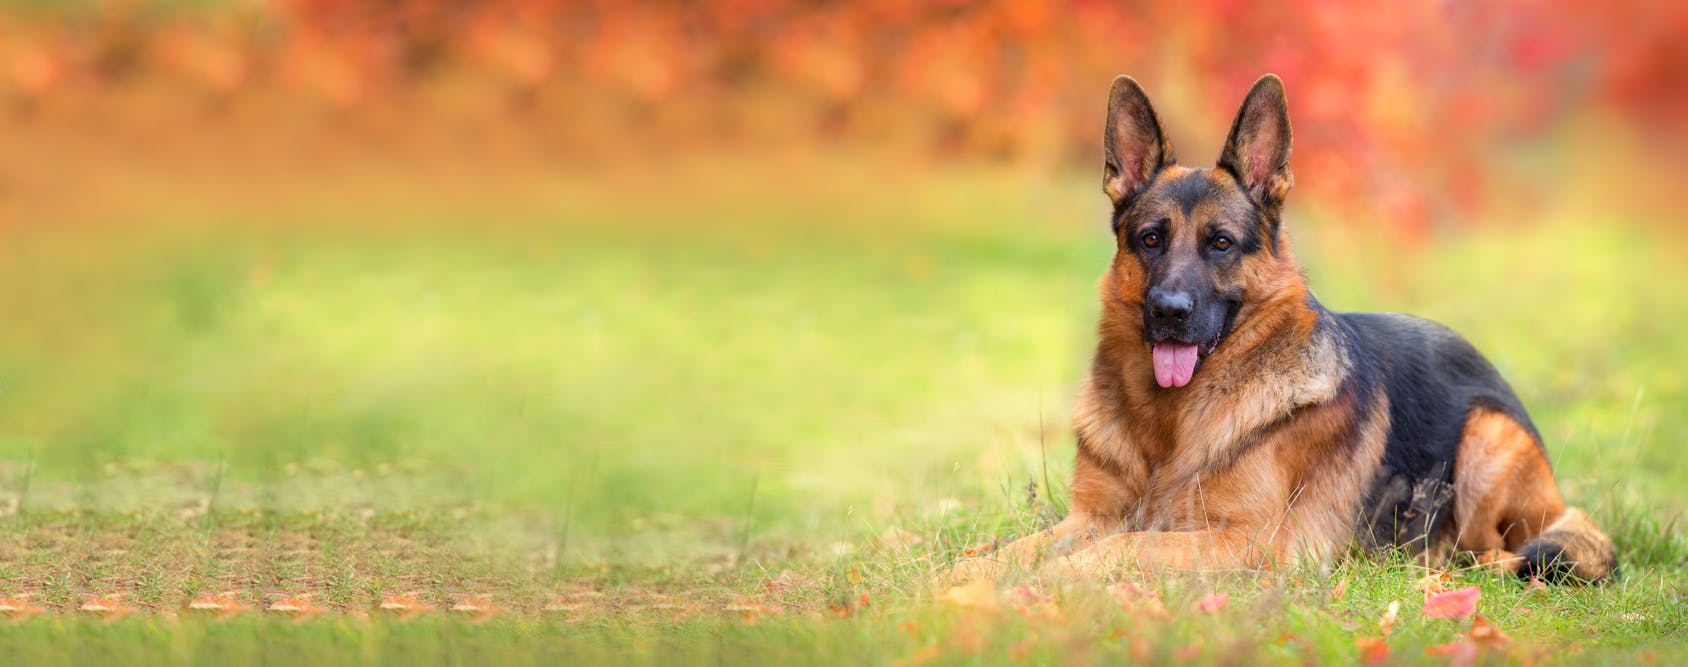 wellness-smart-and-safe-why-your-vet-wants-to-muzzle-your-dog-hero-image